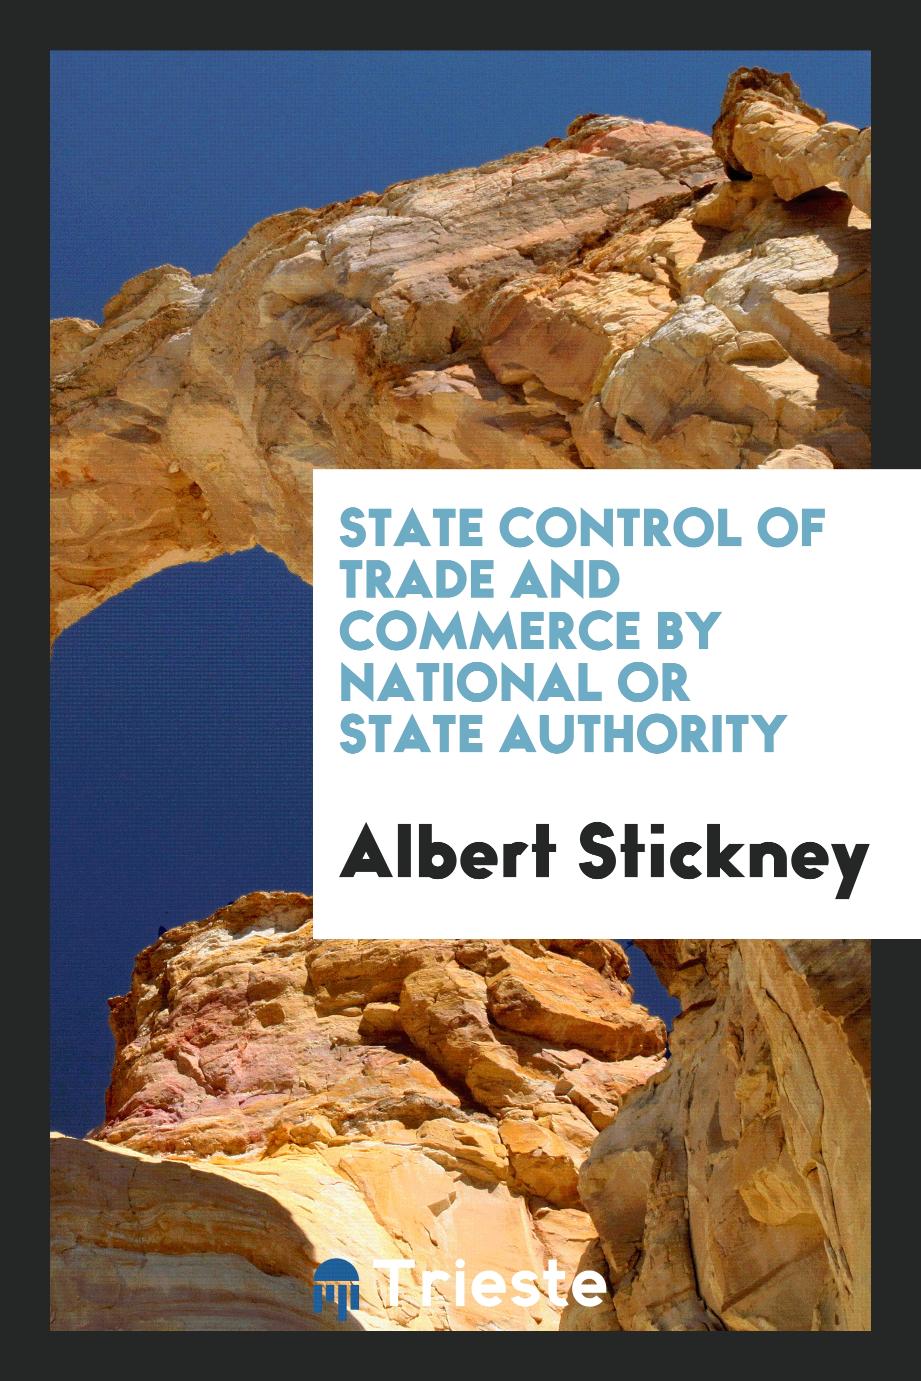 State Control of Trade and Commerce by National or State Authority